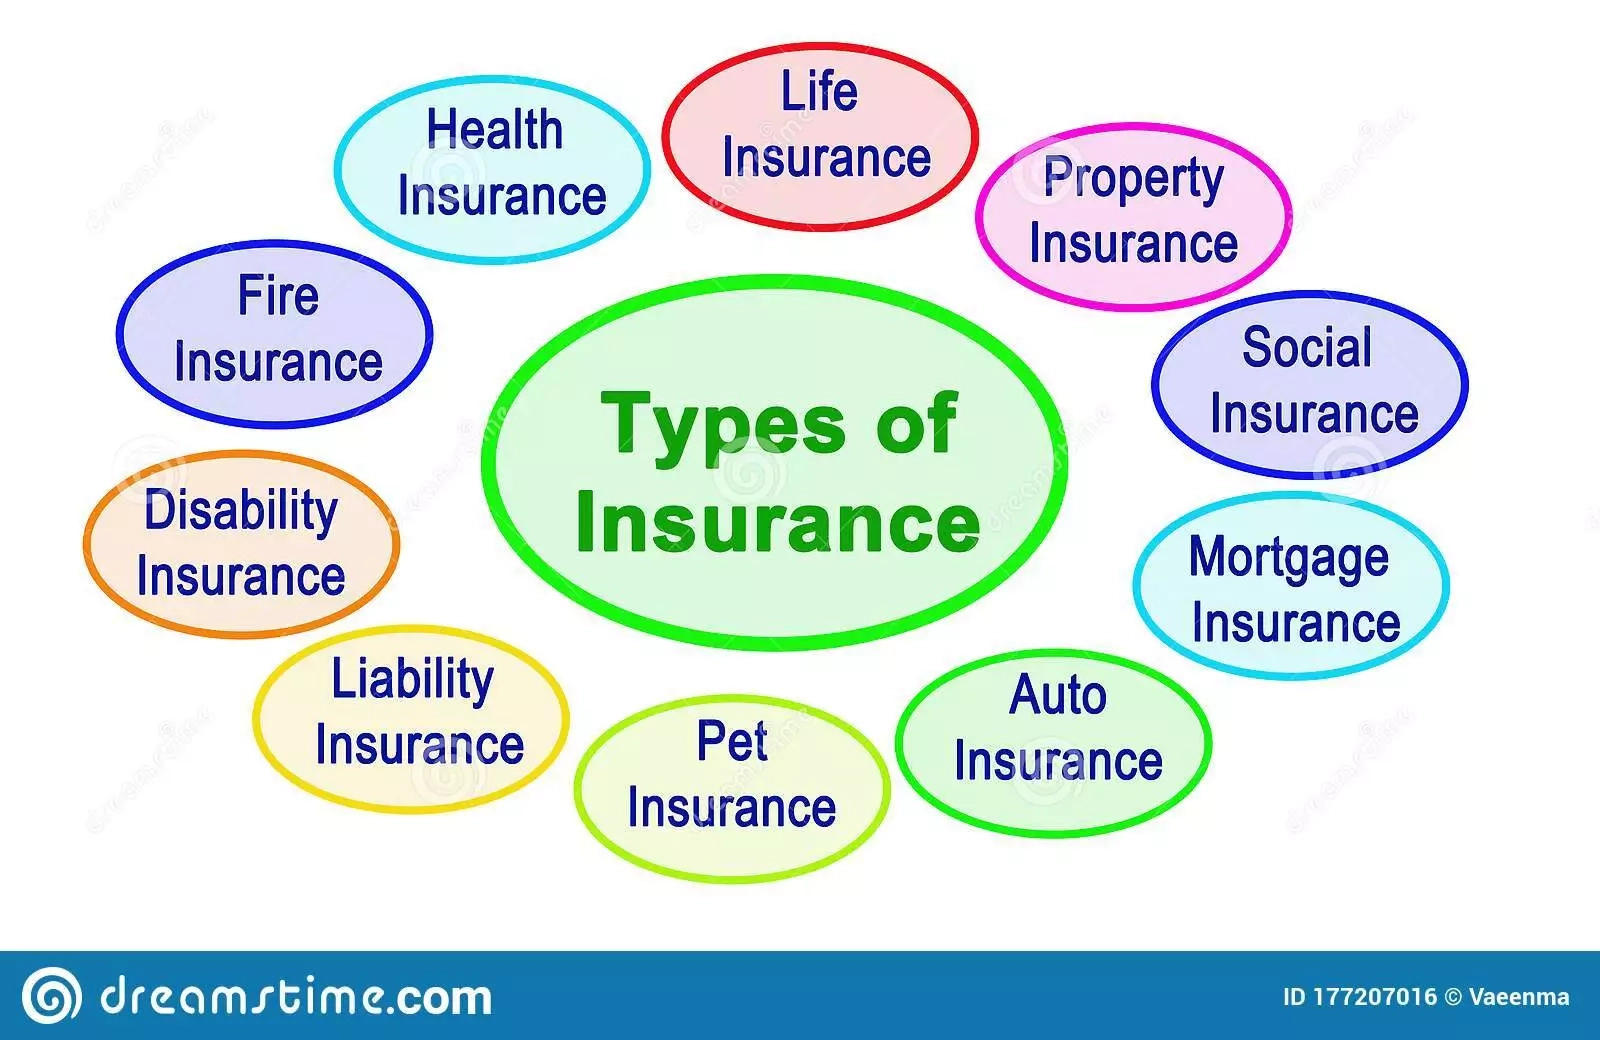 What is insurance classified as in accounting?